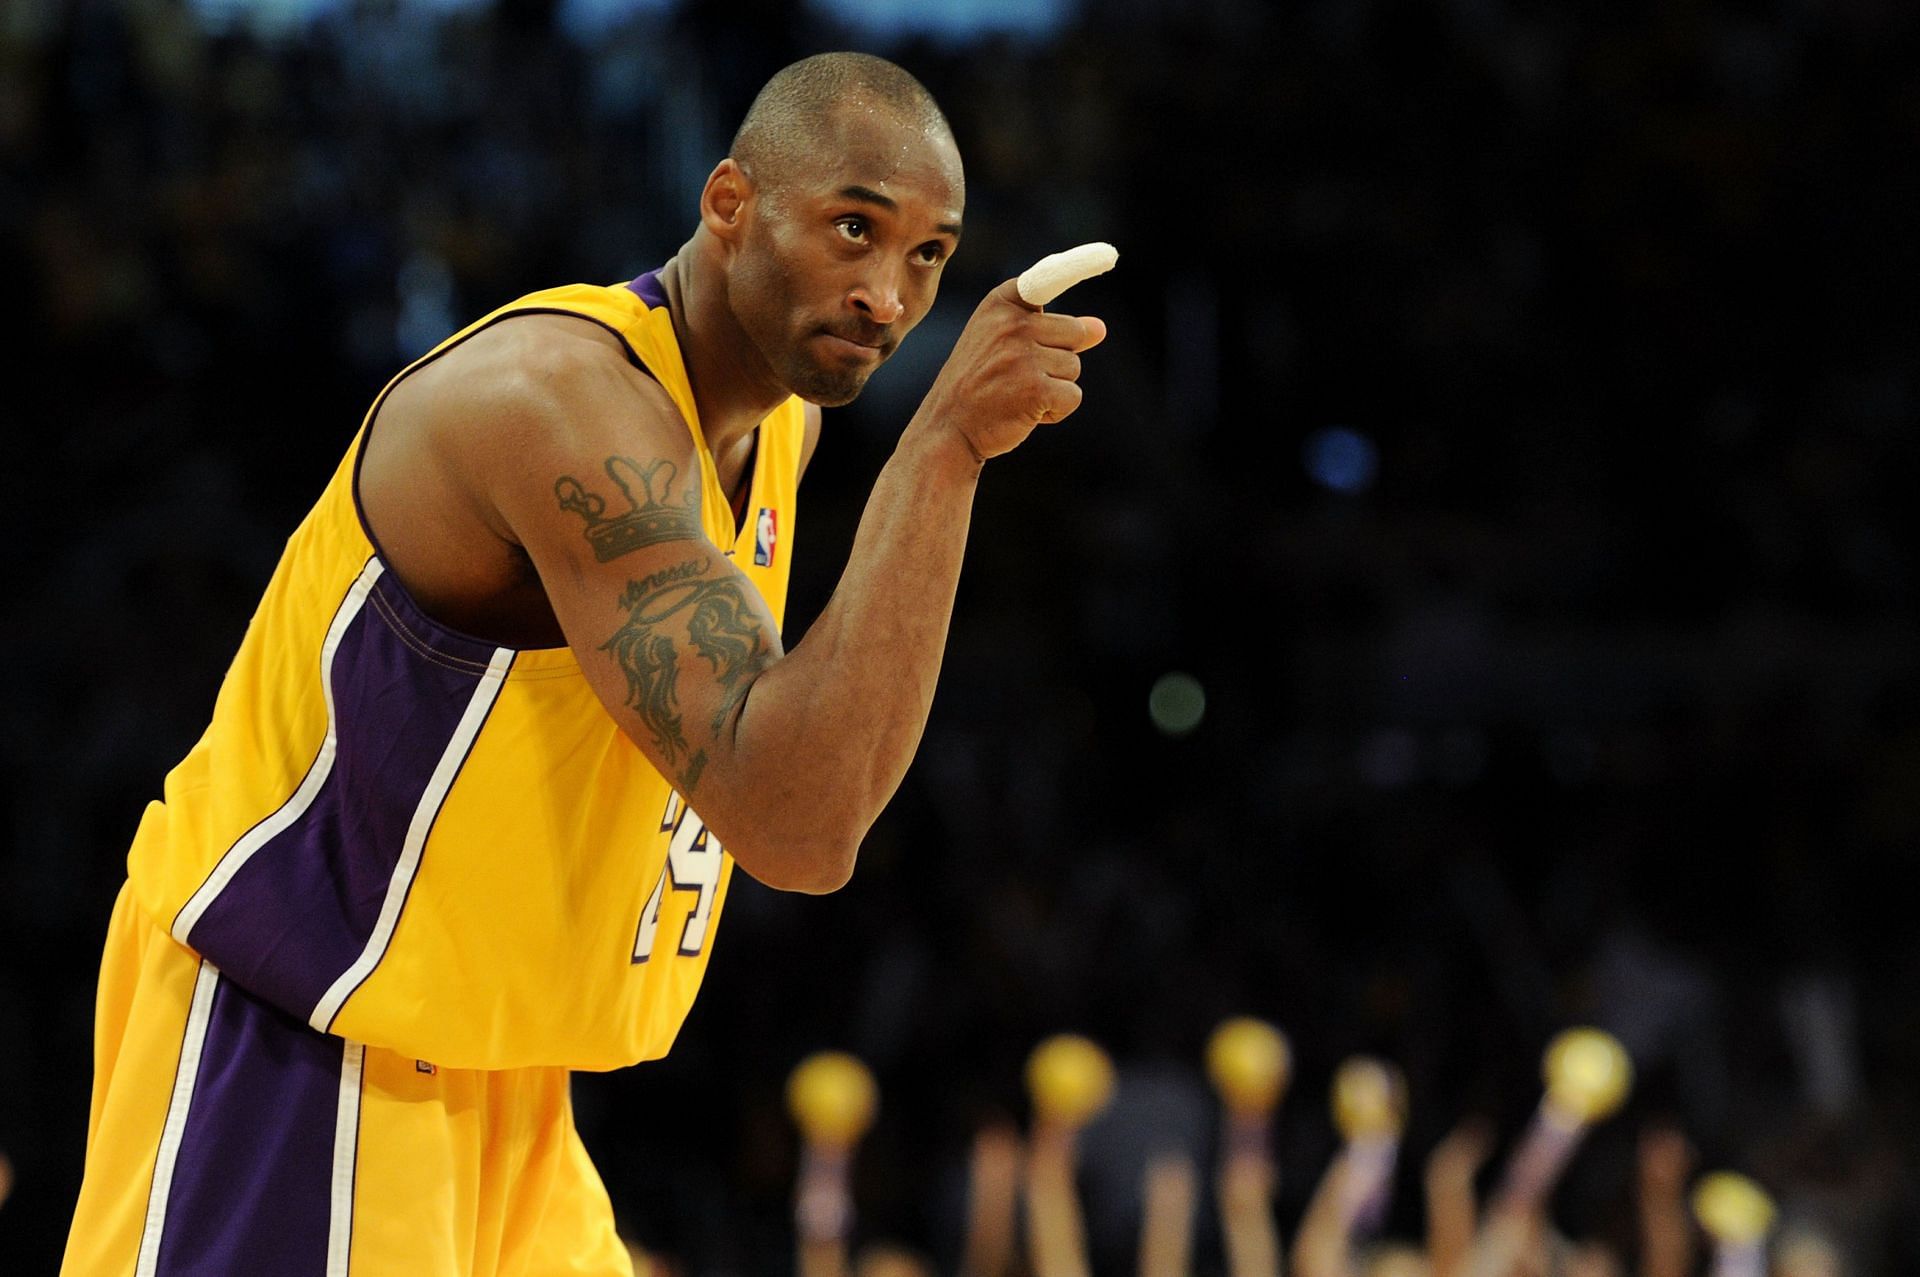 Los Angeles Lakers legend Kobe Bryant was always a threat to light it up as a scorer in the NBA.